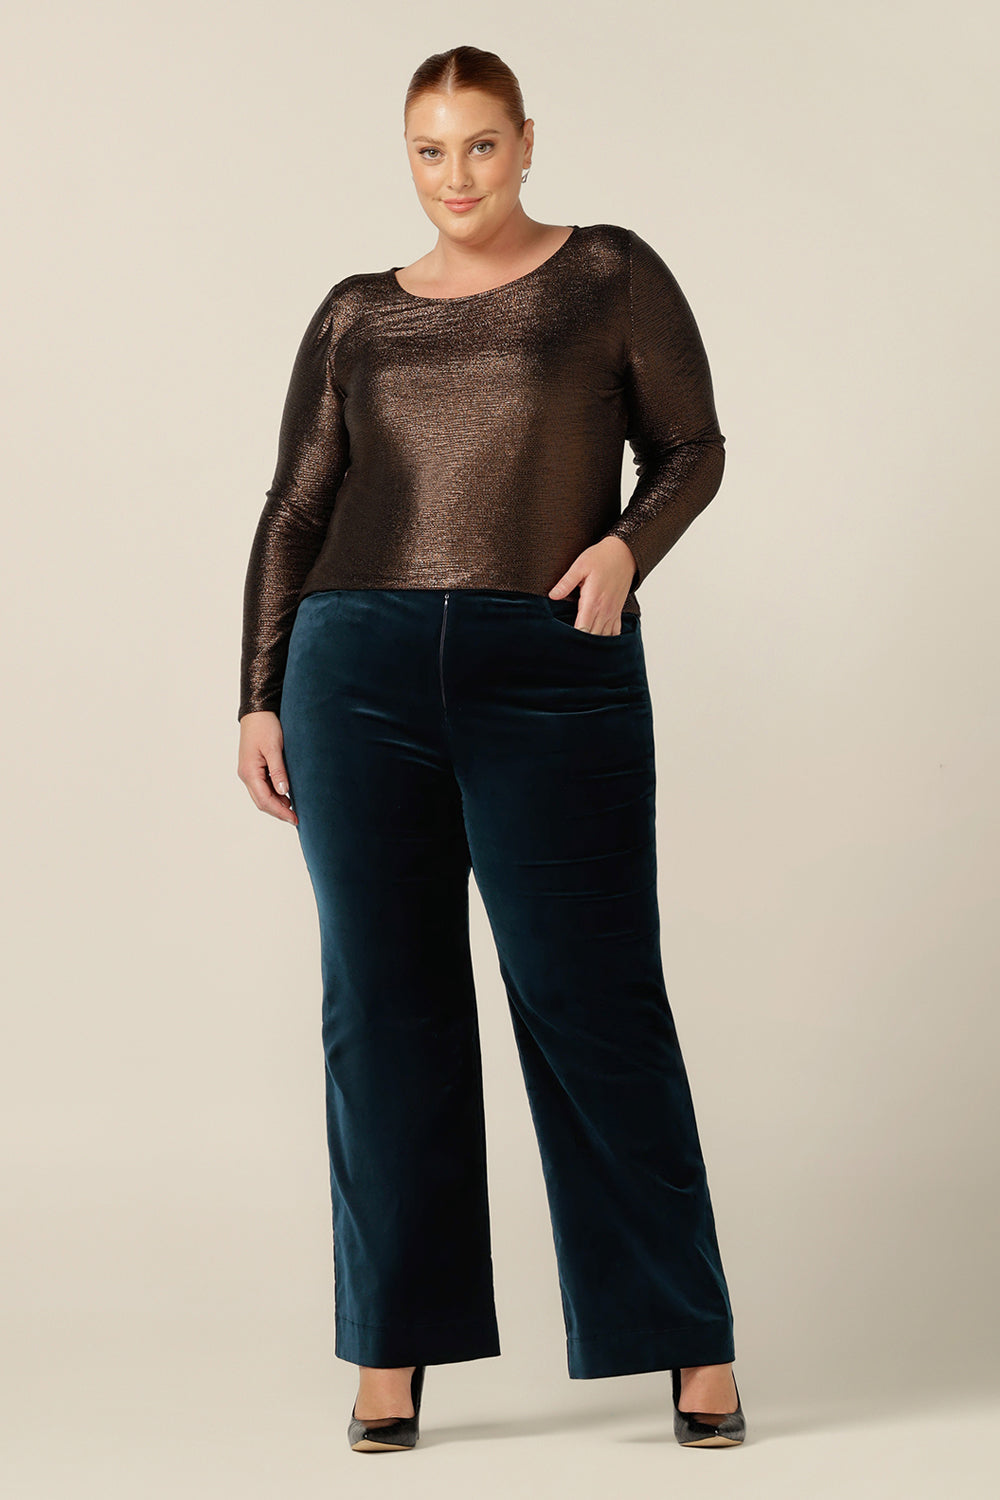 Evening and cocktail wear gets a touch of disco fever for plus size women with these flared leg, tailored pants in petrol green velveteen. Worn with a sparkly mocha brown, long sleeve top for eveningwear, these special event pants are made in Australia in sizes 8 to 24, petite to plus sizes.